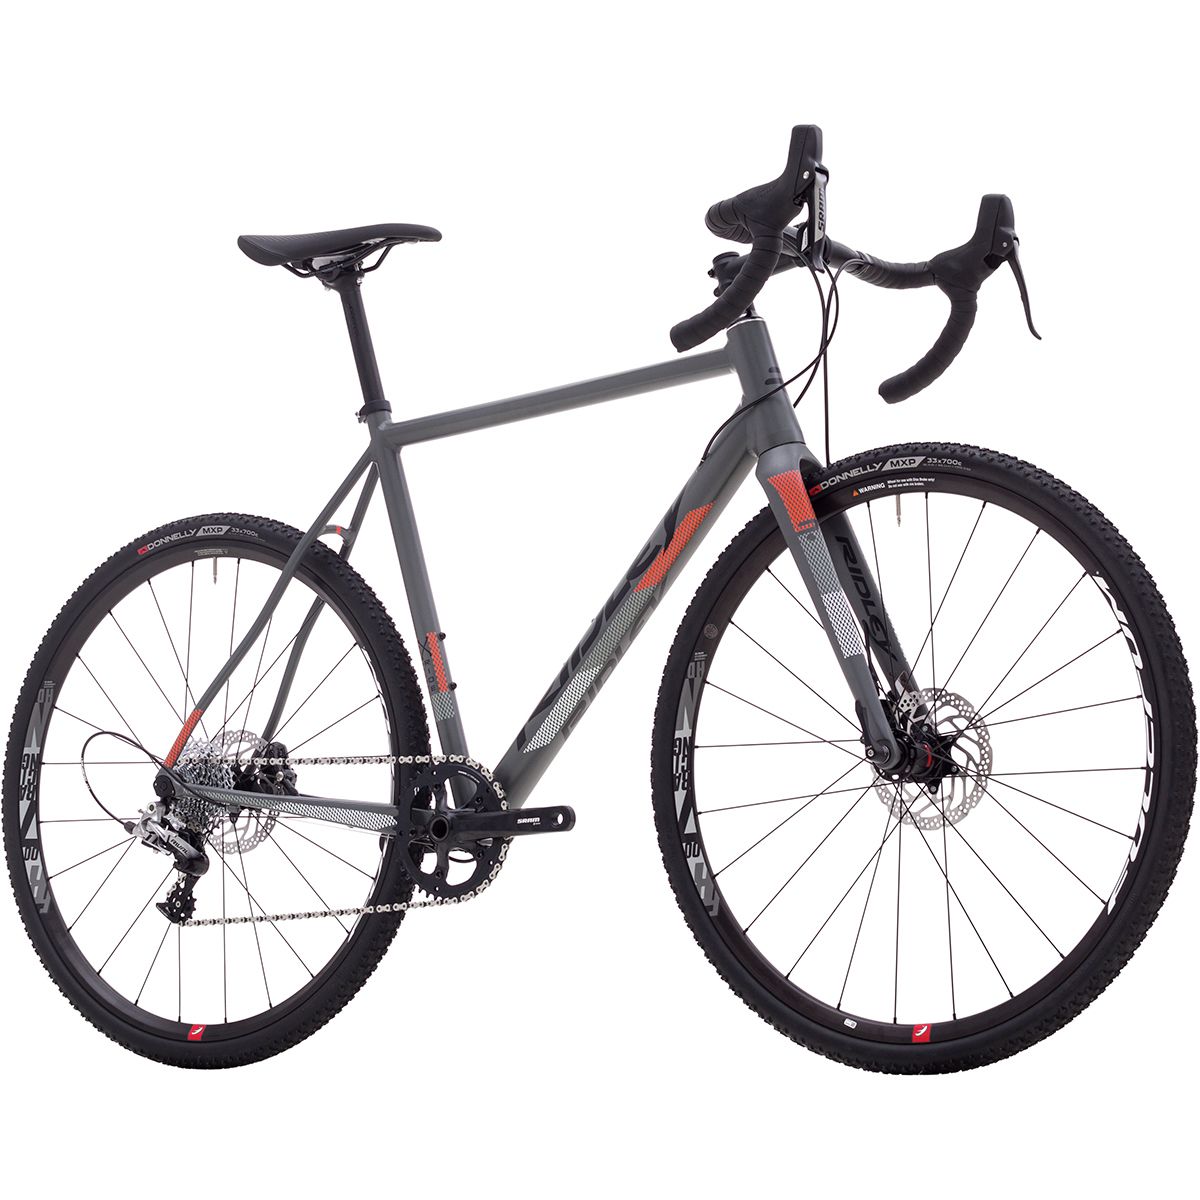 Ridley X-Ride Disc Rival 1 Complete Cyclocross Bike